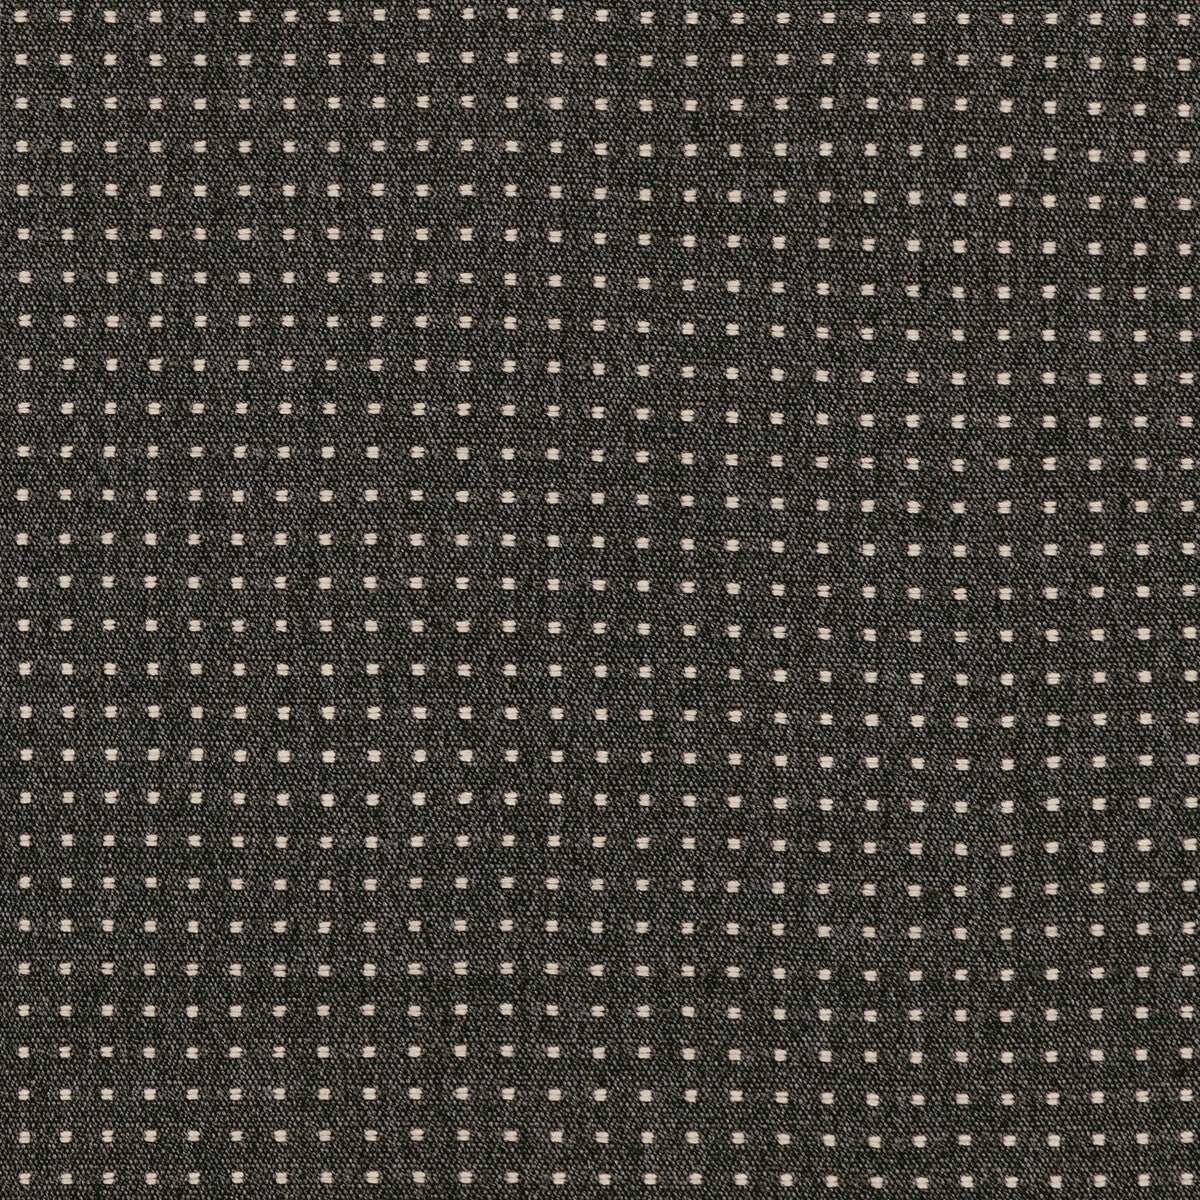 Tellus fabric in obsidian color - pattern GWF-3764.21.0 - by Lee Jofa Modern in the Kelly Wearstler VI collection